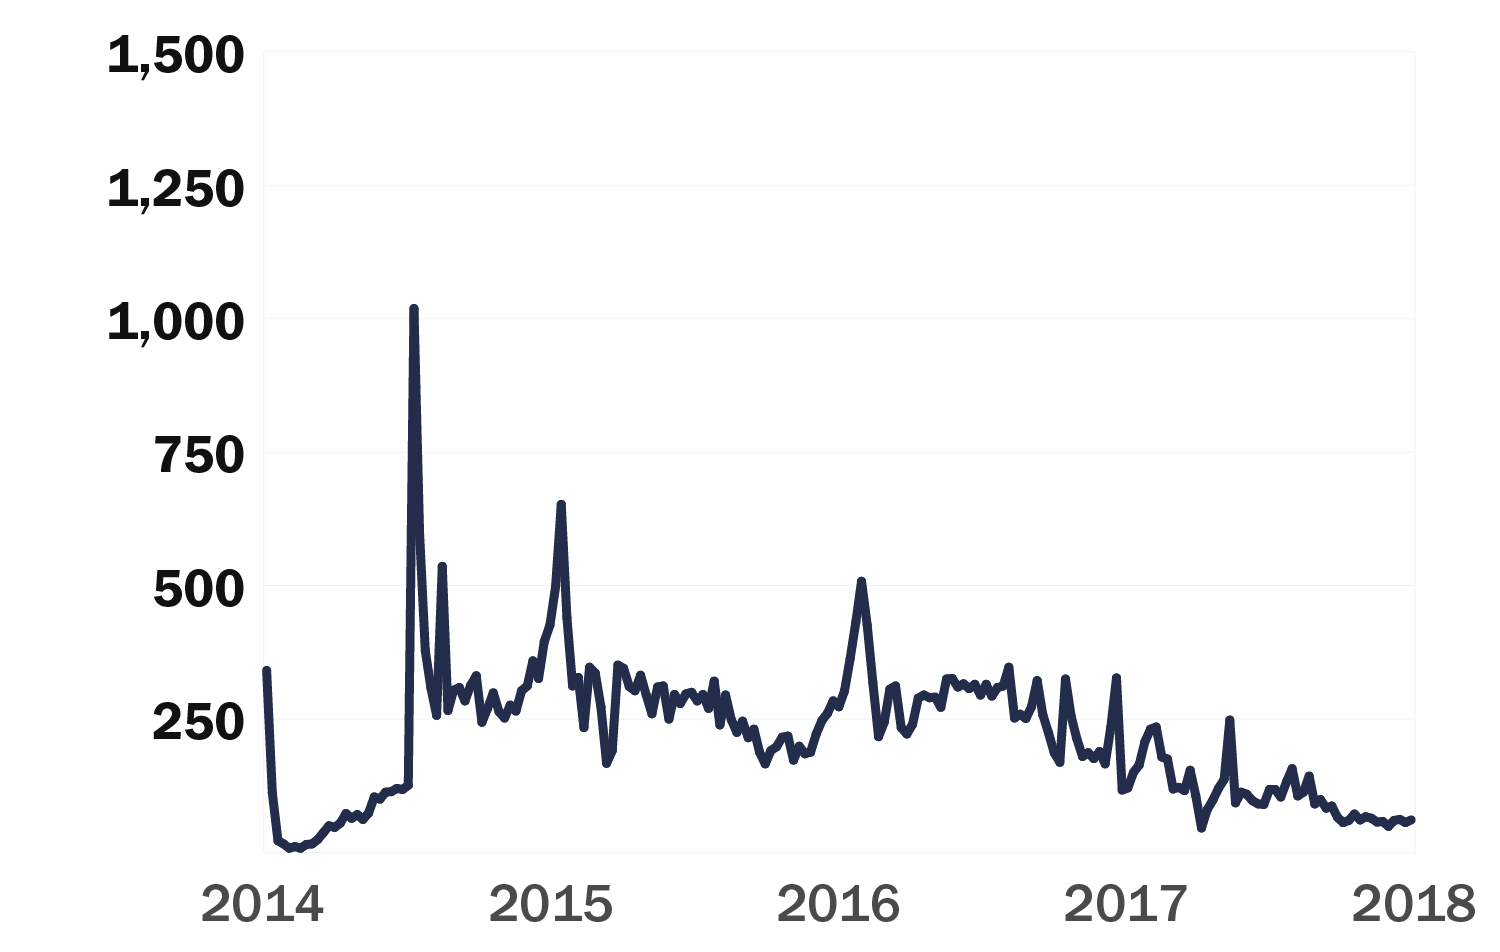 Graph of page views form 2014 to 2018.  Spike at the end of 2014 over 1000 page views.  